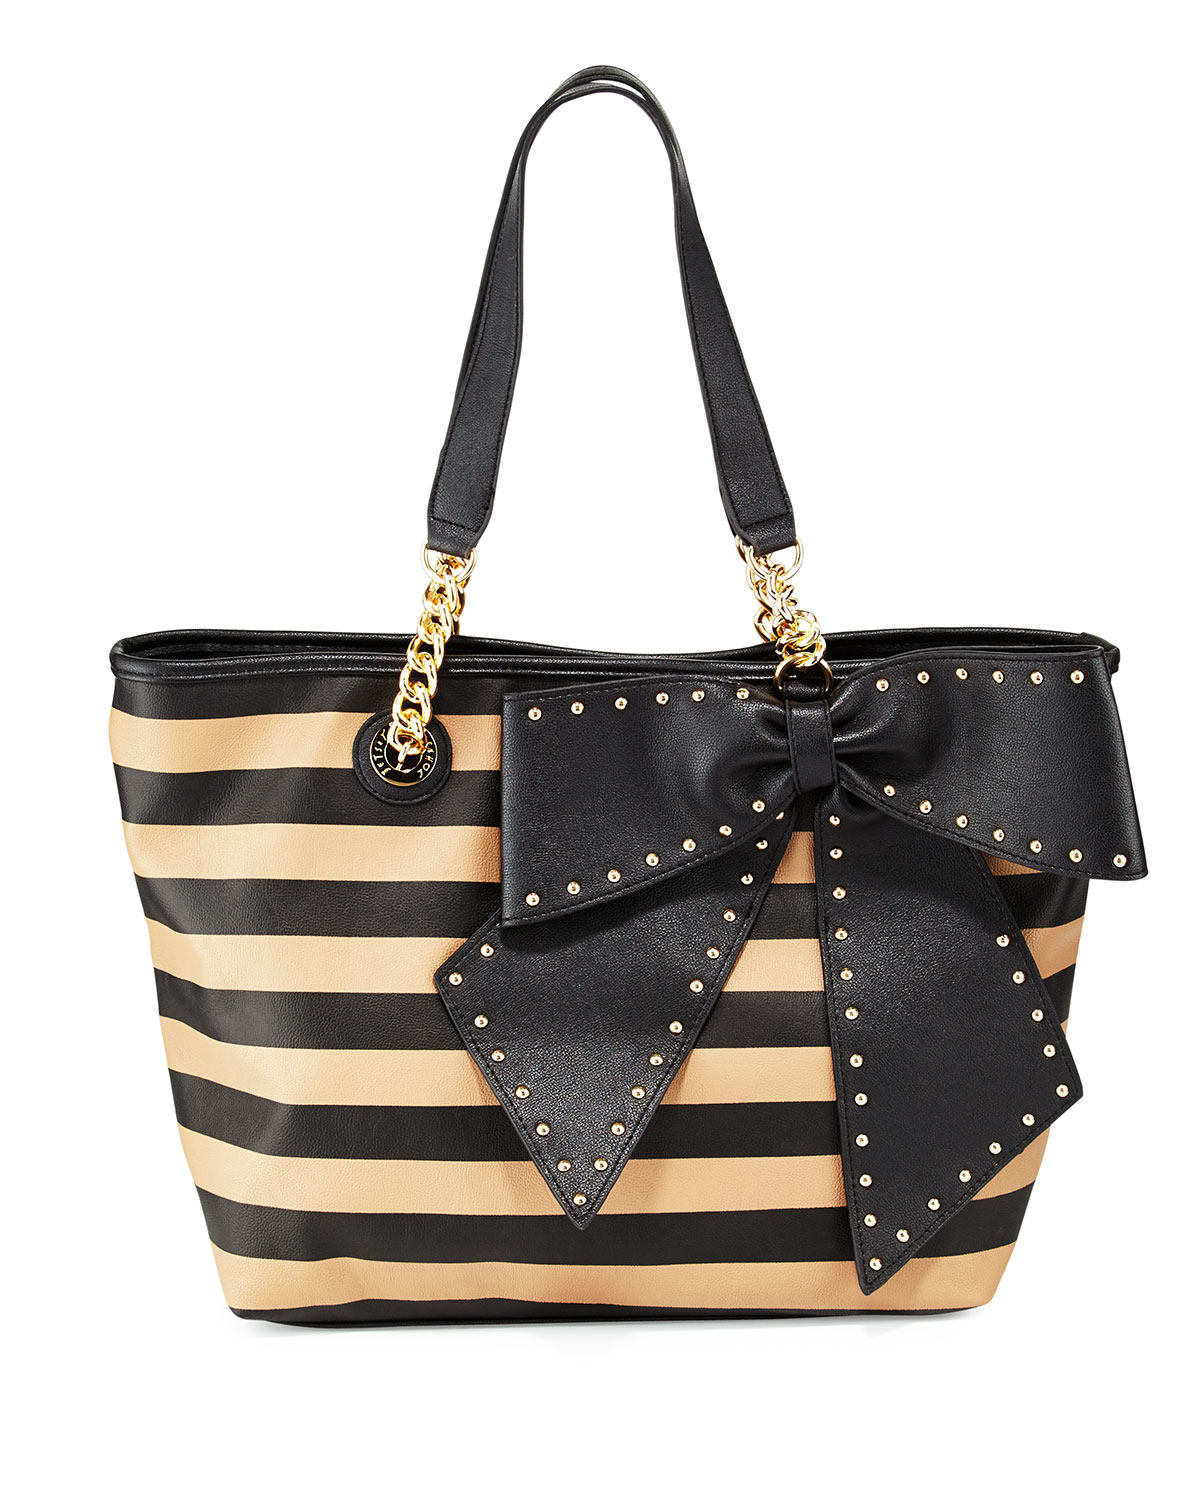 Betsey johnson Bowlette Striped Bow Tote Bag in Black | Lyst